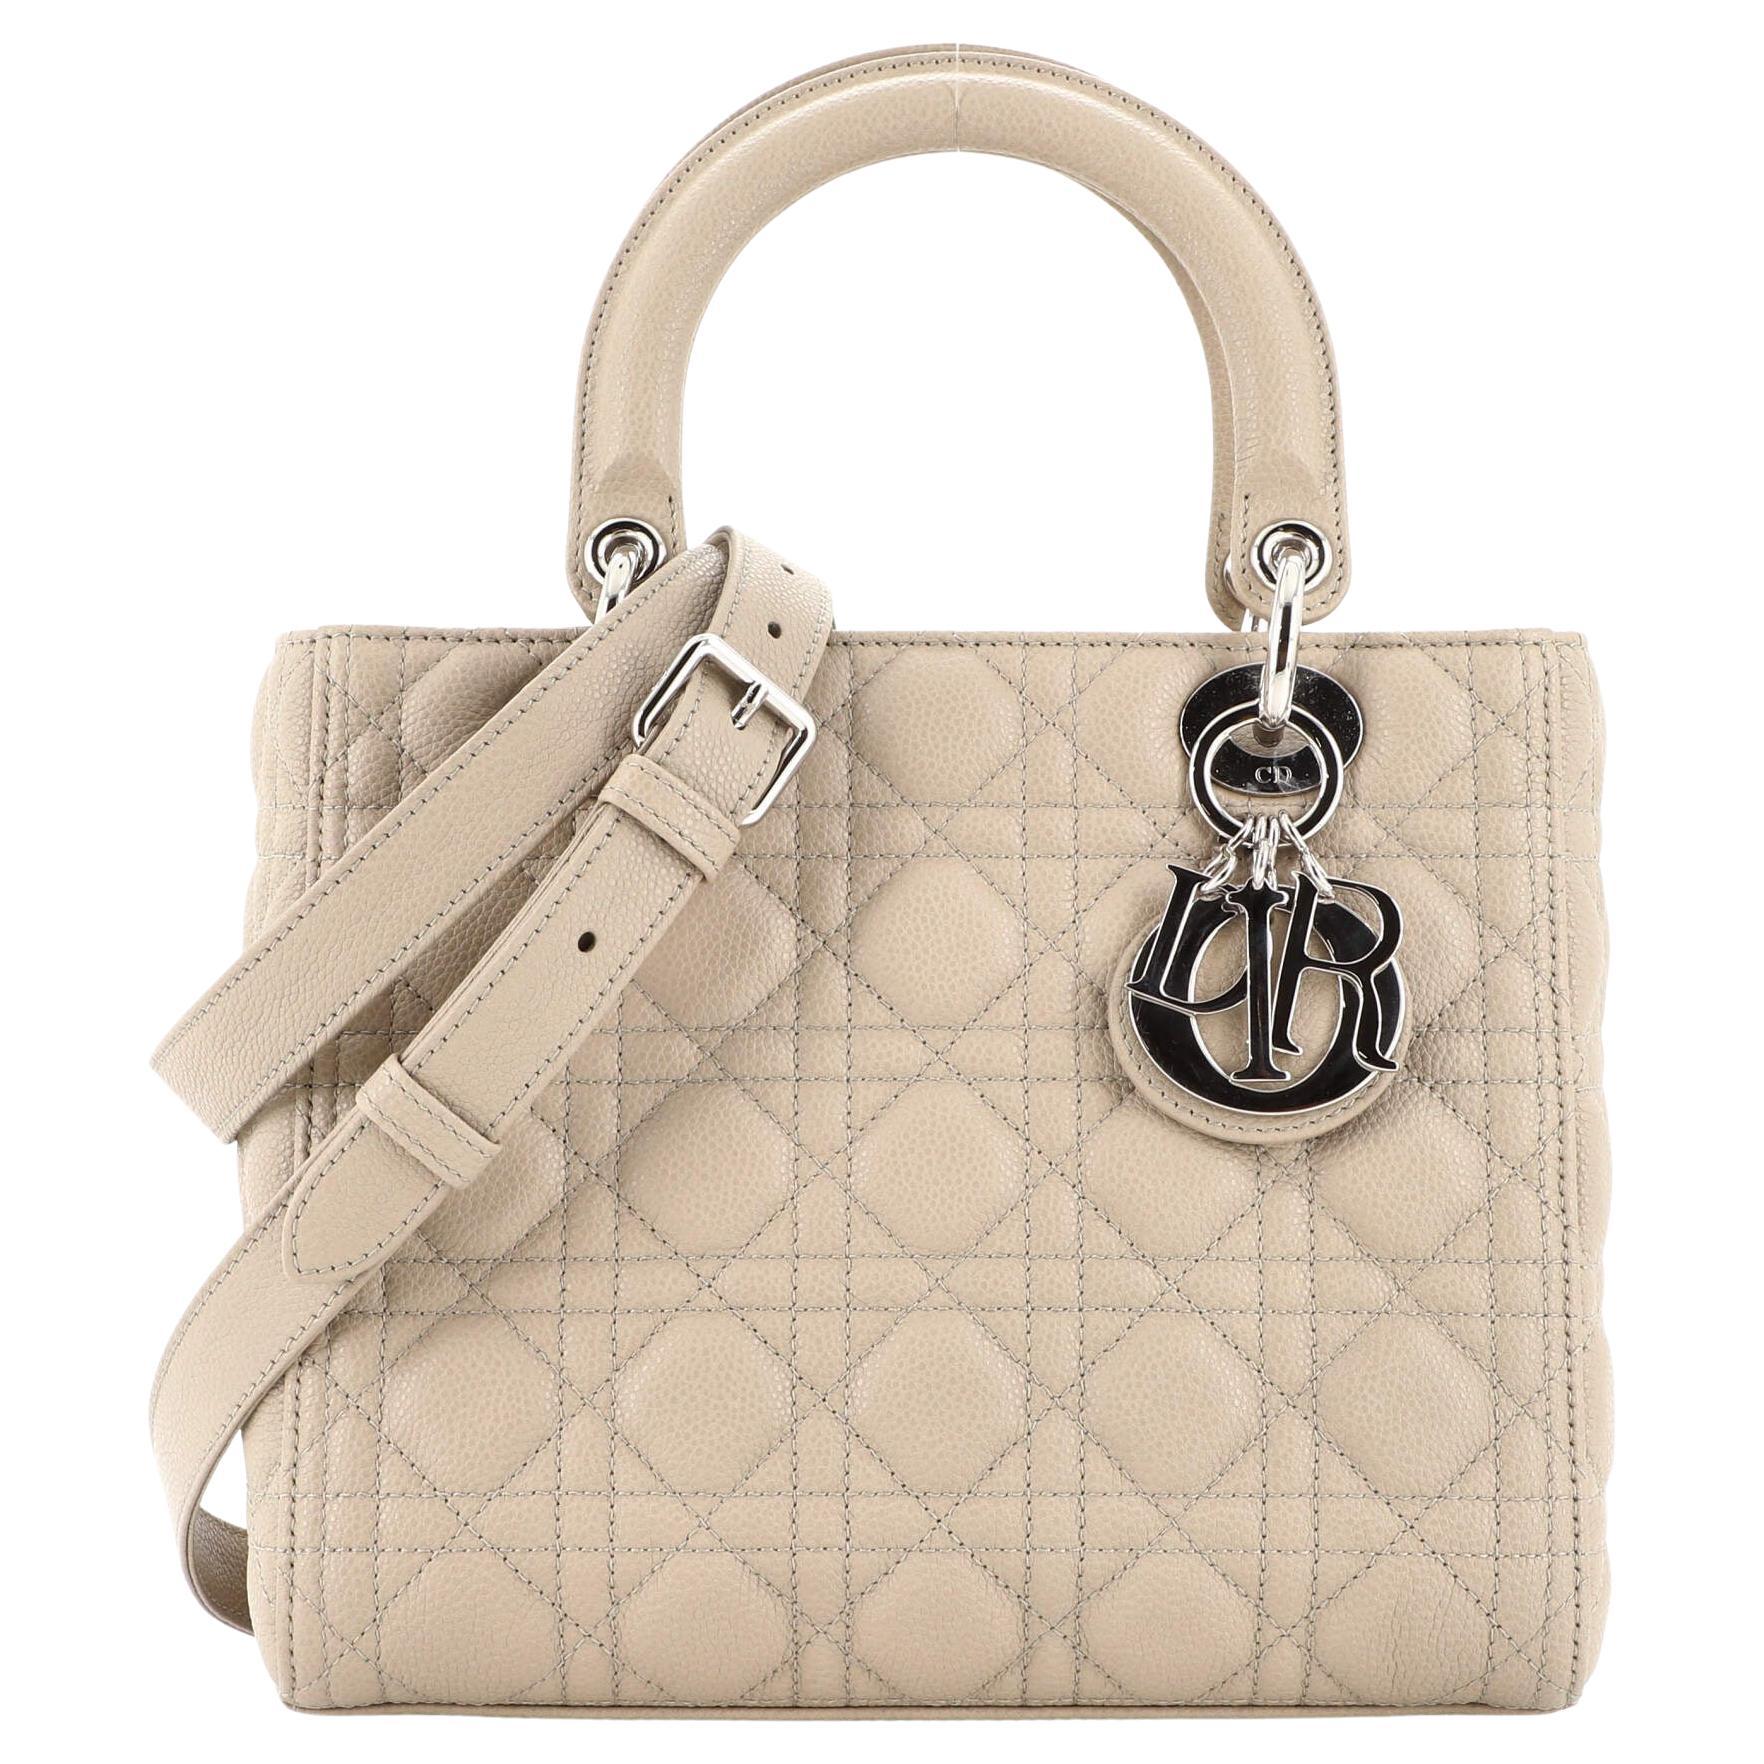 Christian Dior Lady Dior Bag Cannage Quilt Grained Calfskin Medium For Sale